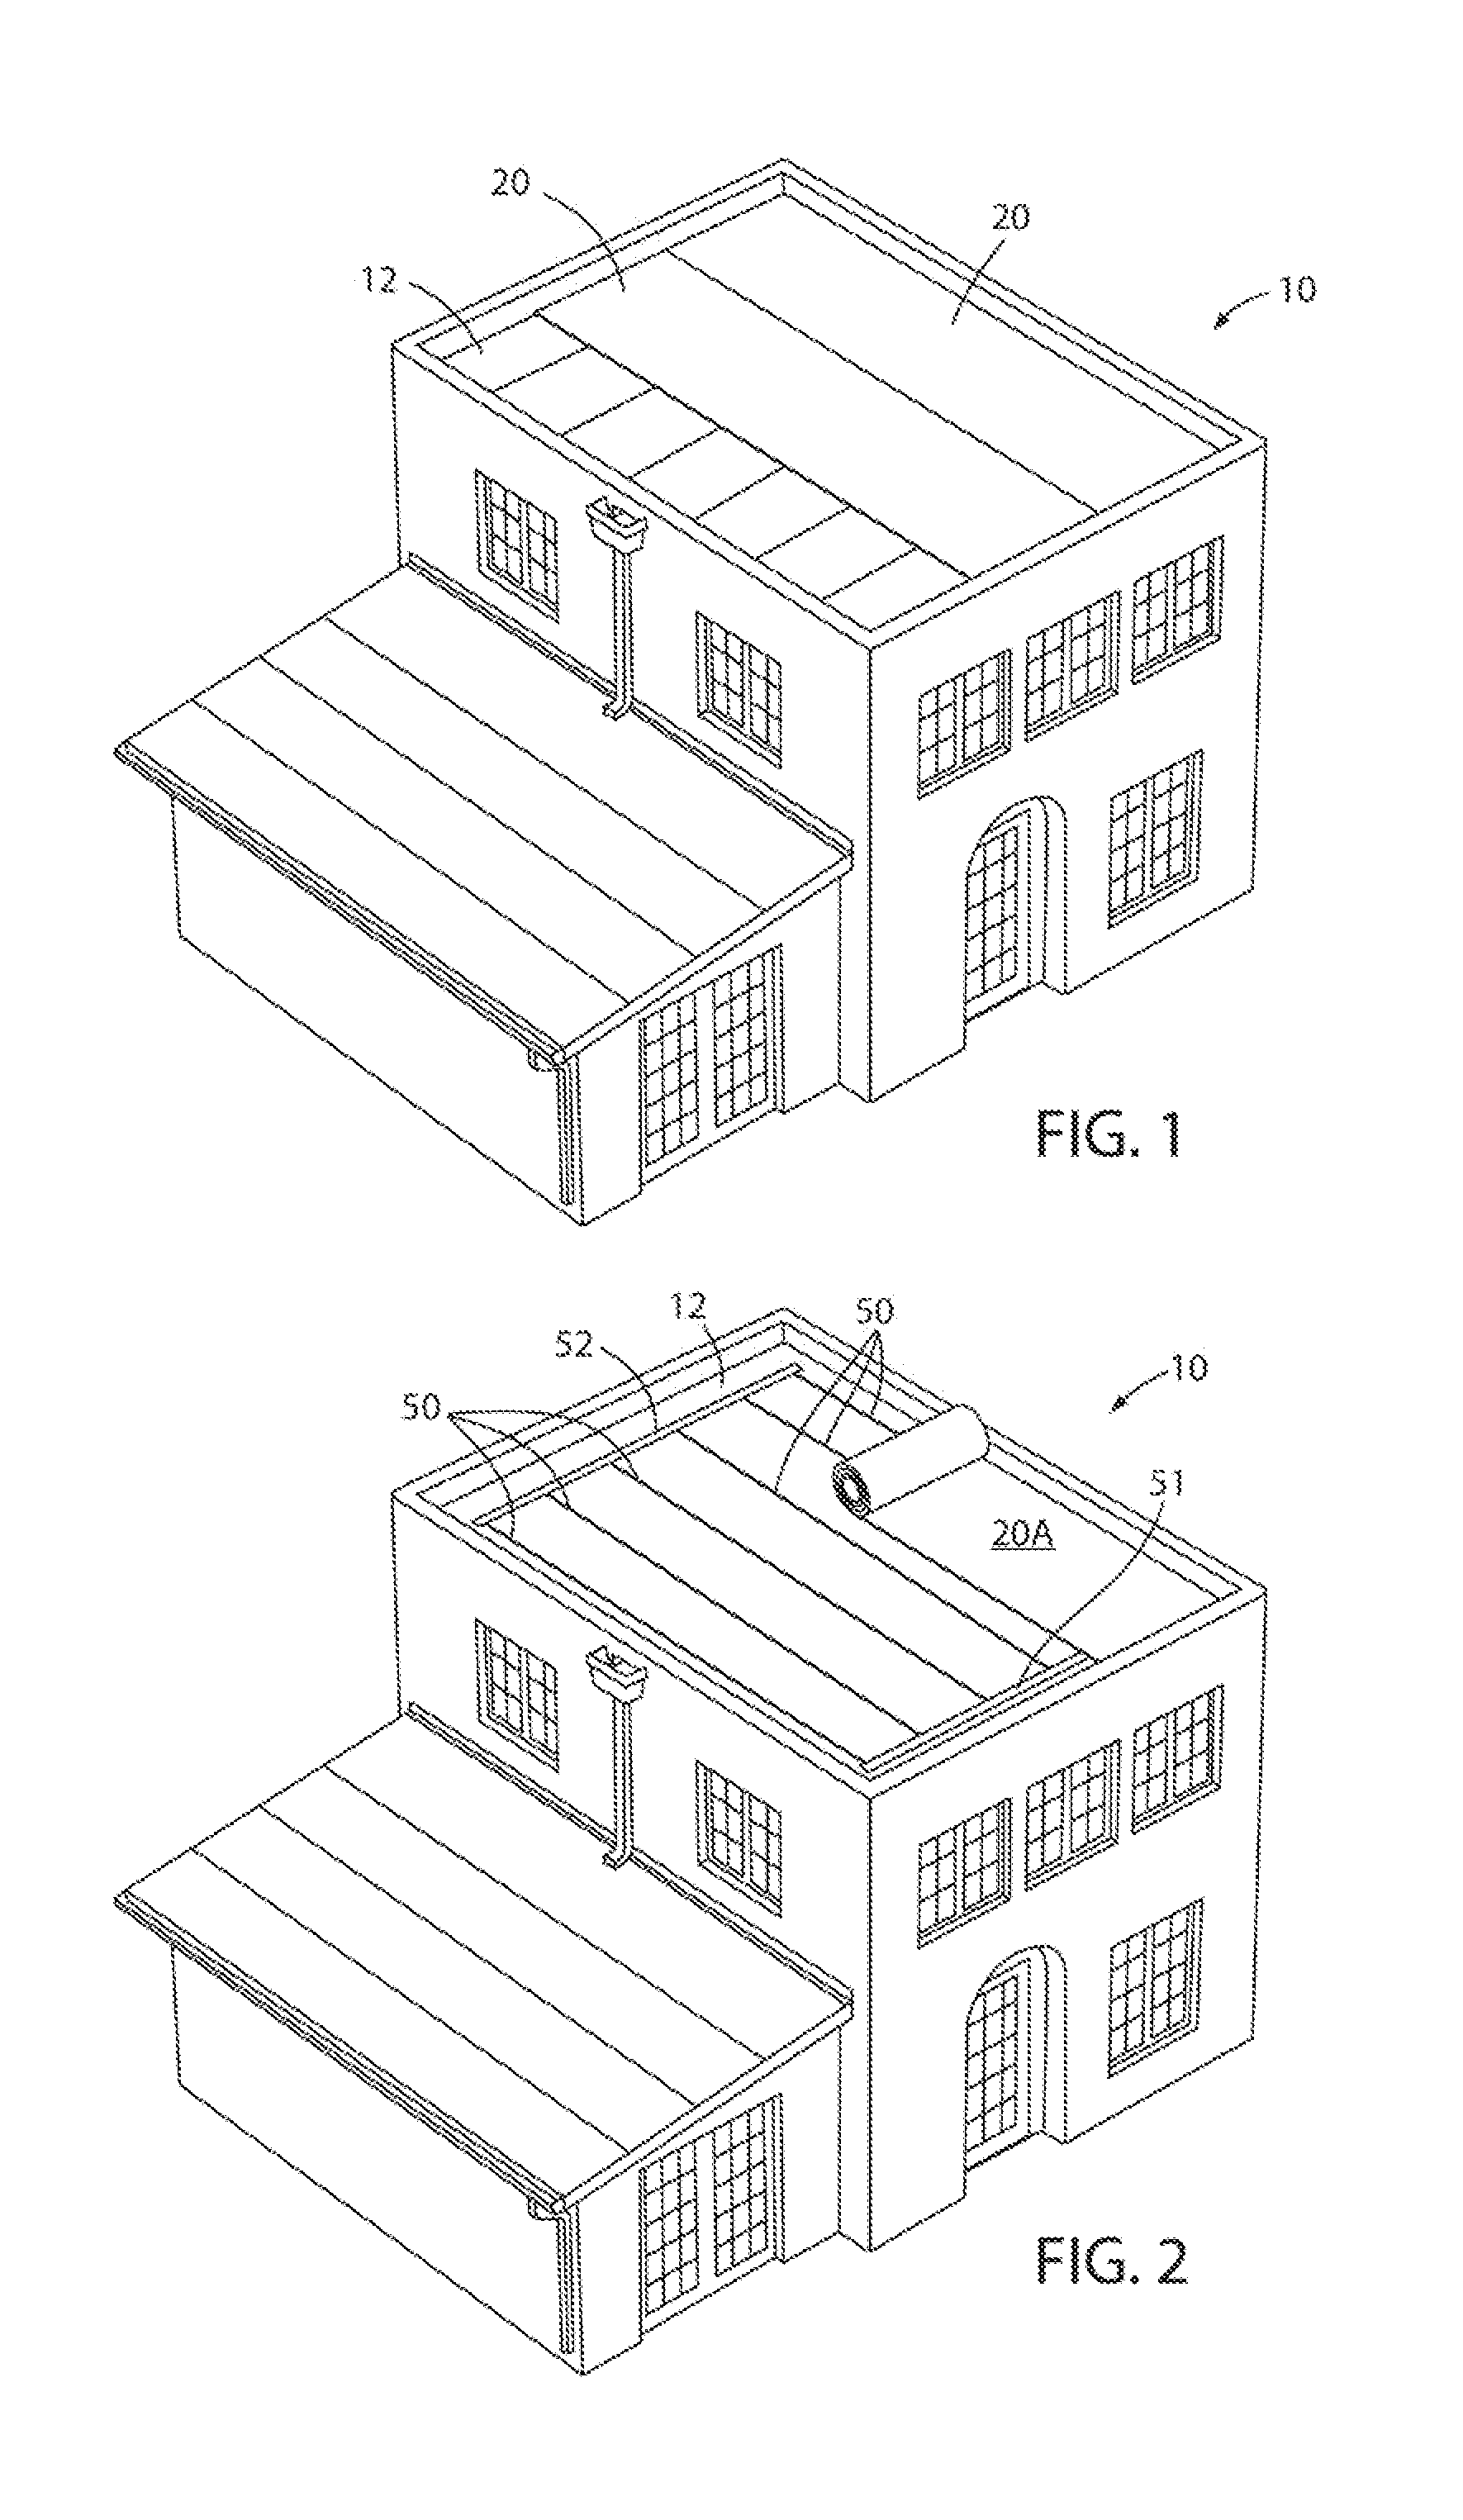 Roofing system with sensors